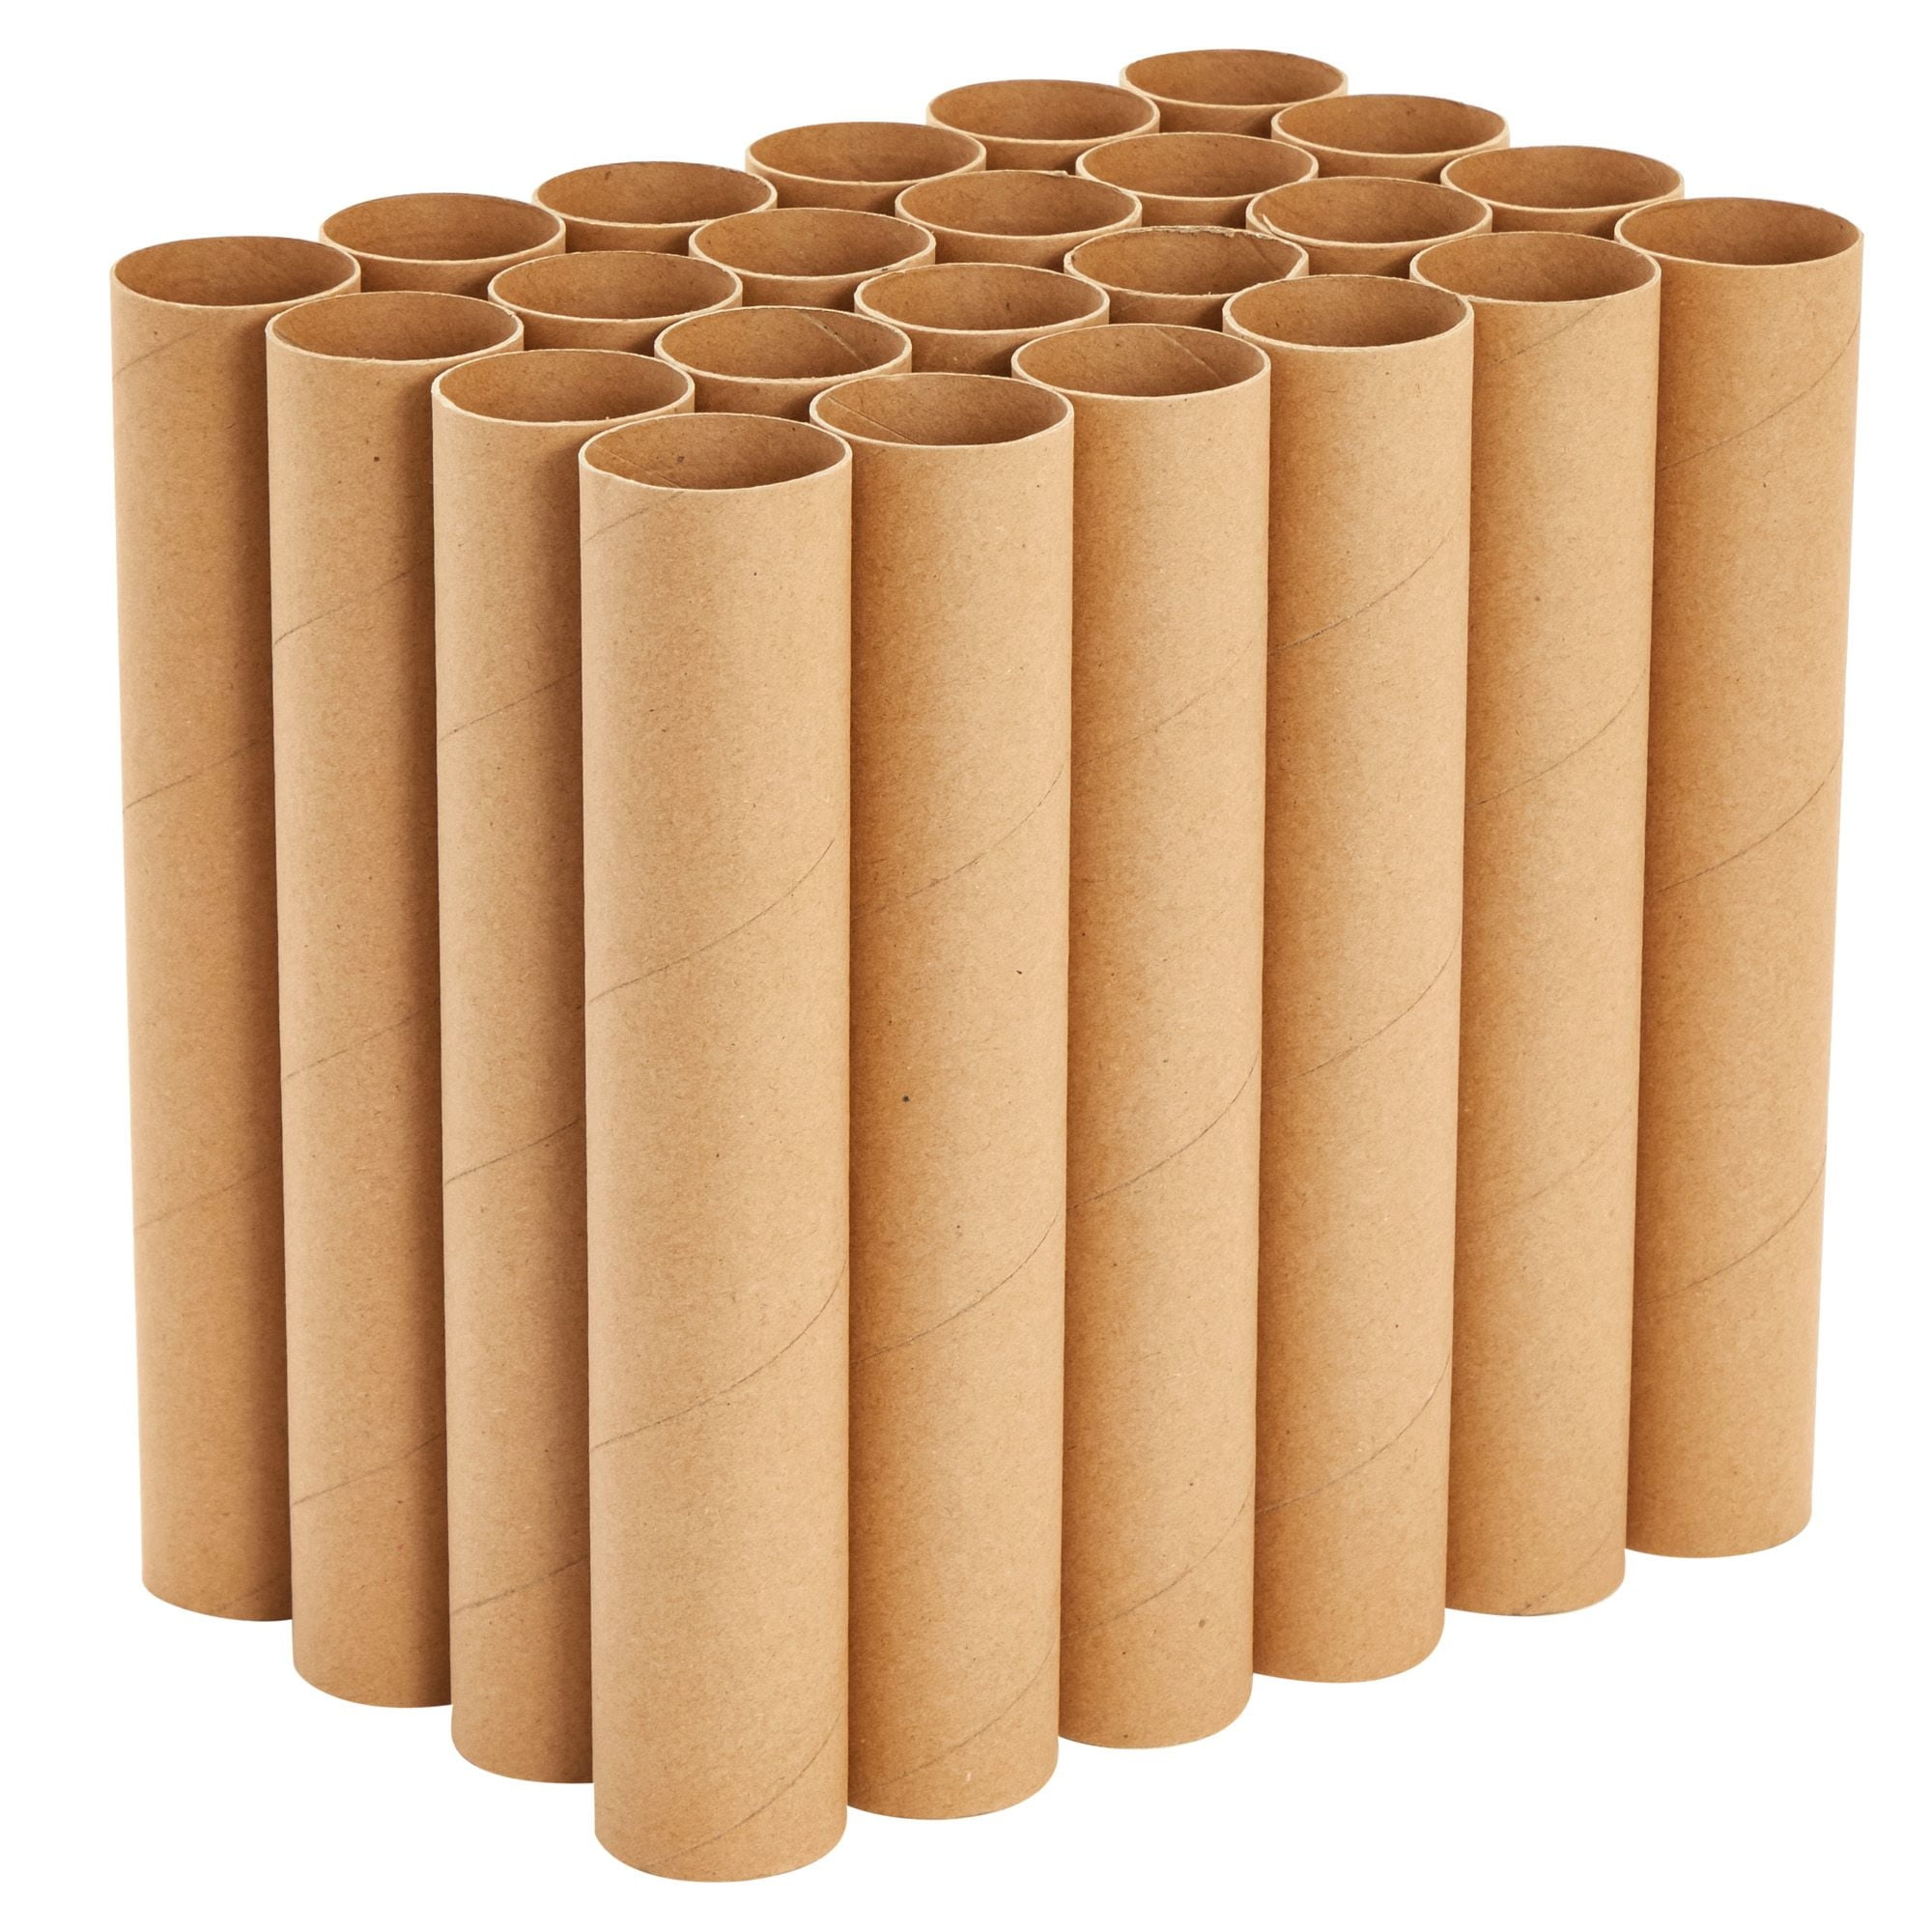  24 Pack Toilet Paper Rolls for Crafts, Empty White Cardboard  Tubes for Classroom, DIY Projects (1.6 x 4 in)